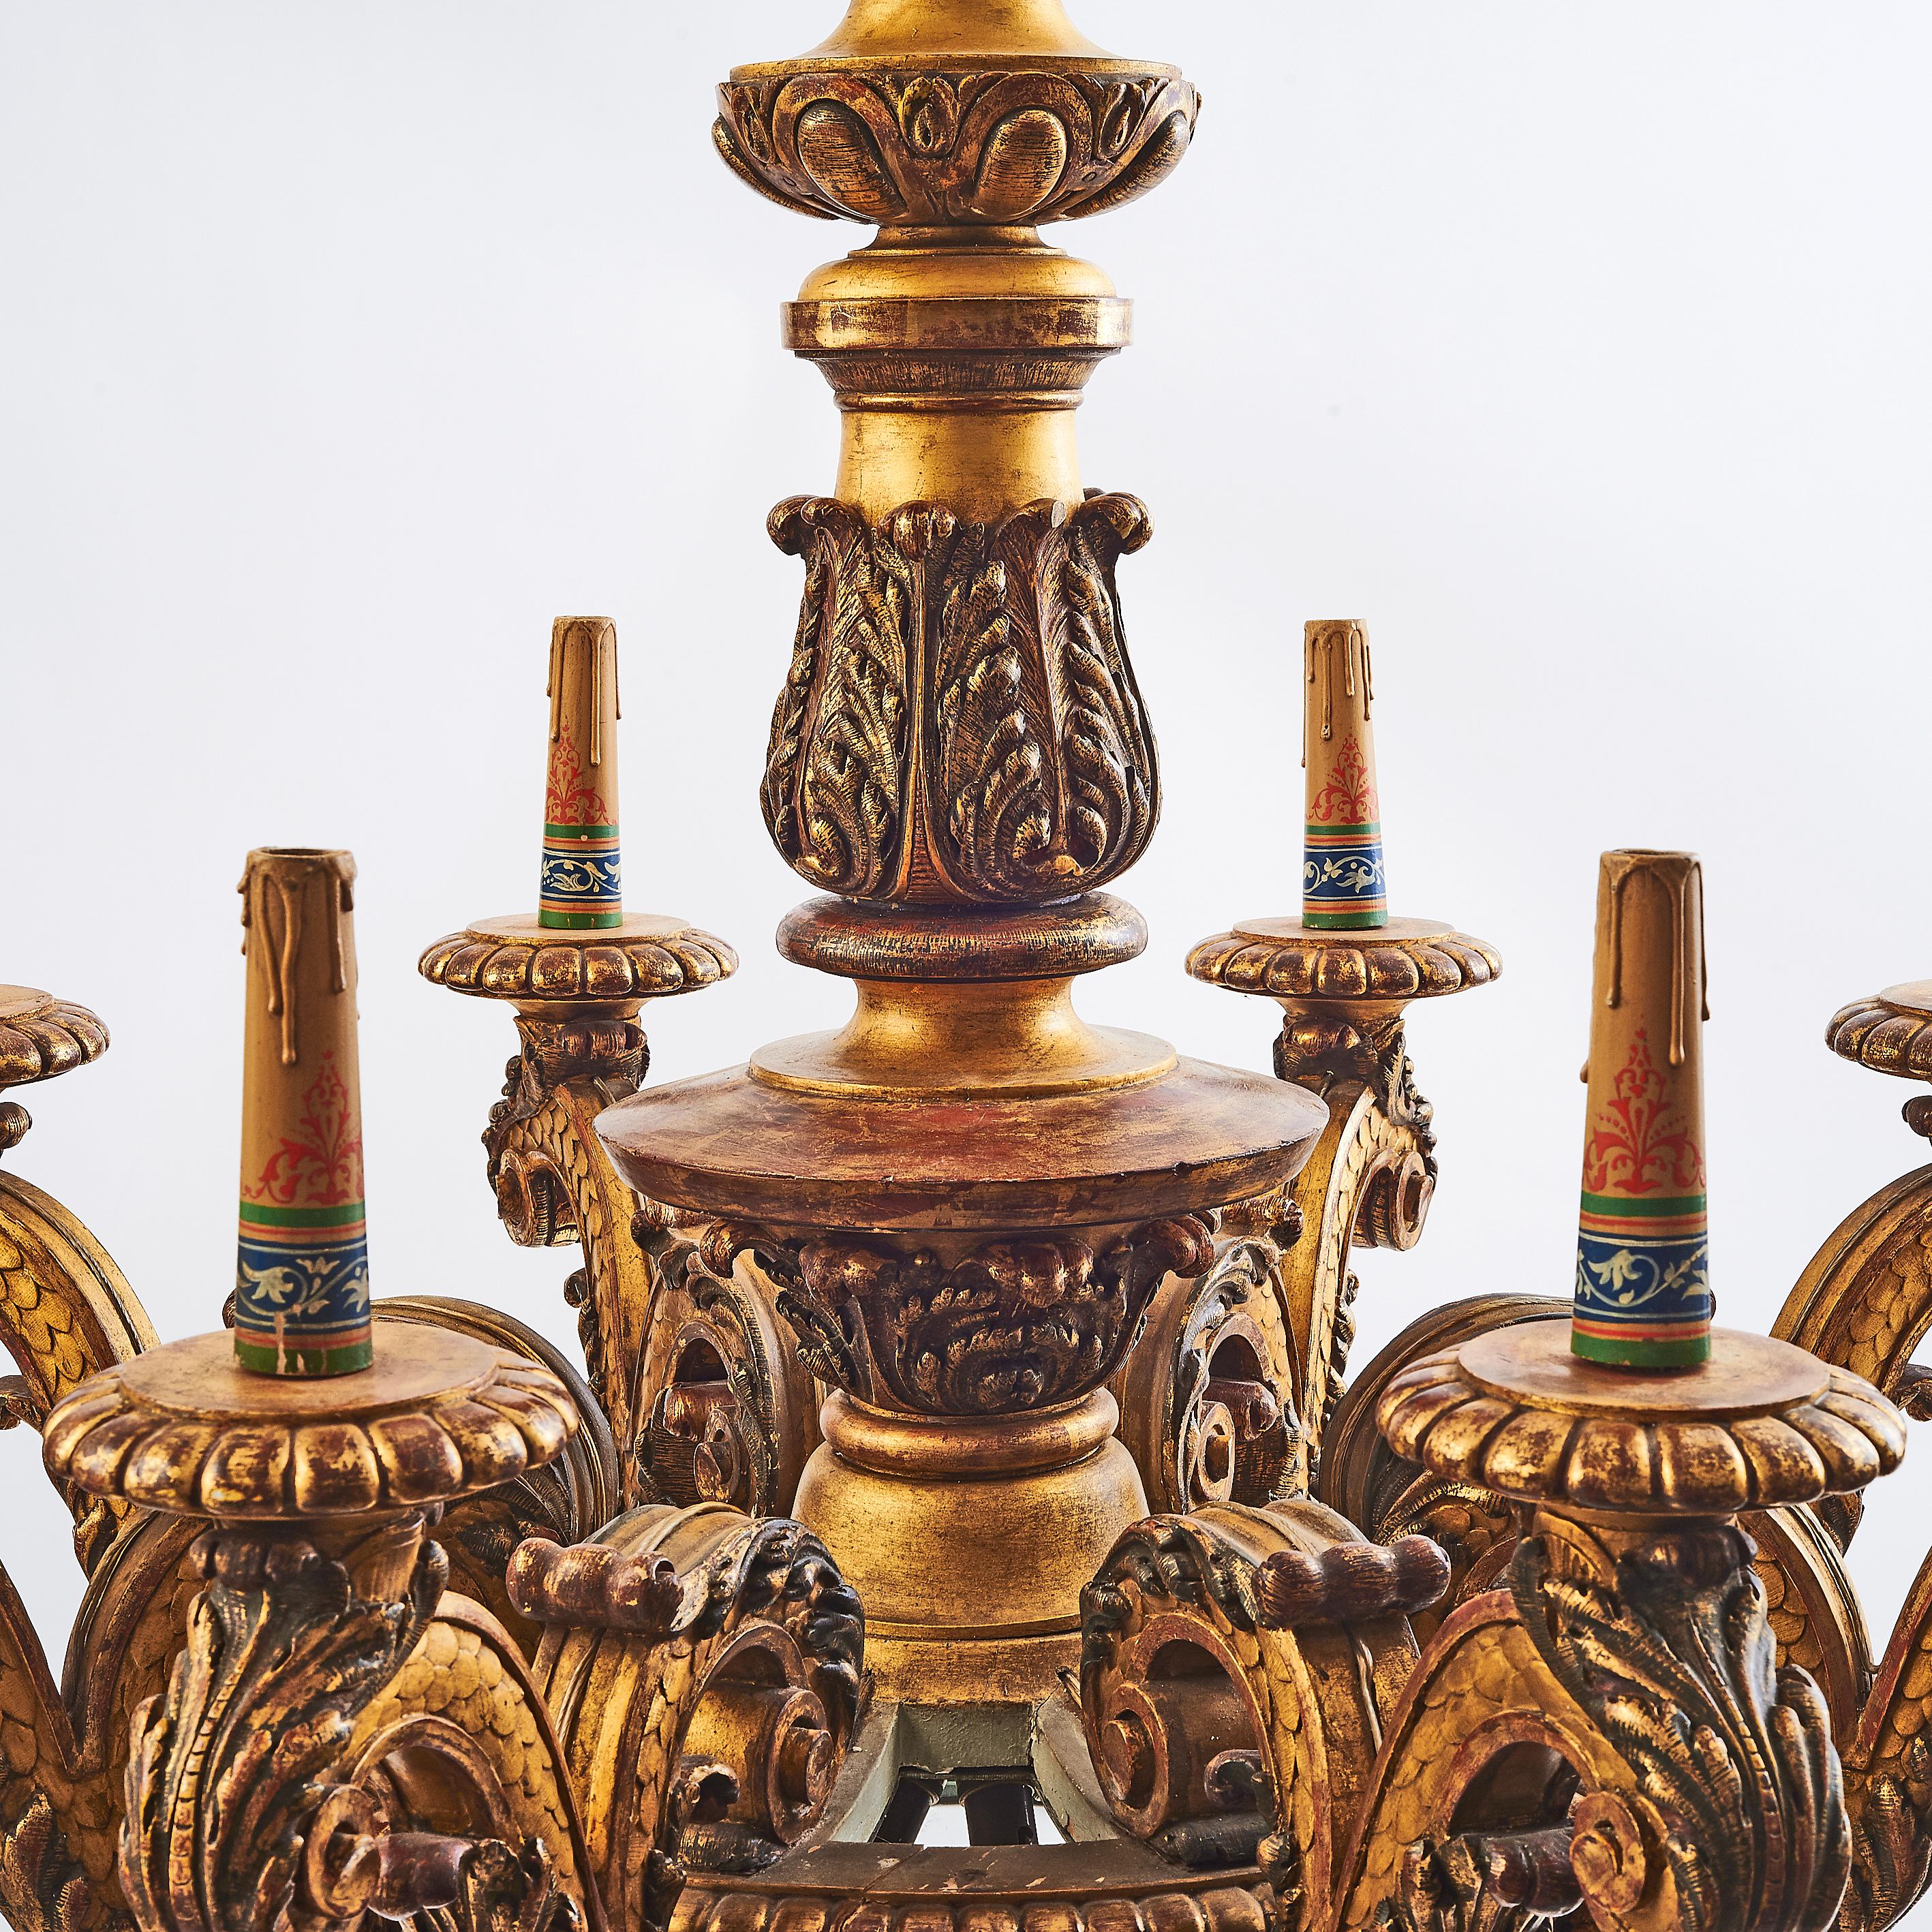 Large highly carved giltwood Baroque style chandelier, circa 1900. The central column punctuated throughout with rich foliate carving, below this eight outwardly scrolling arms, with a scale design and acanthus leaf underside, the arms each finished